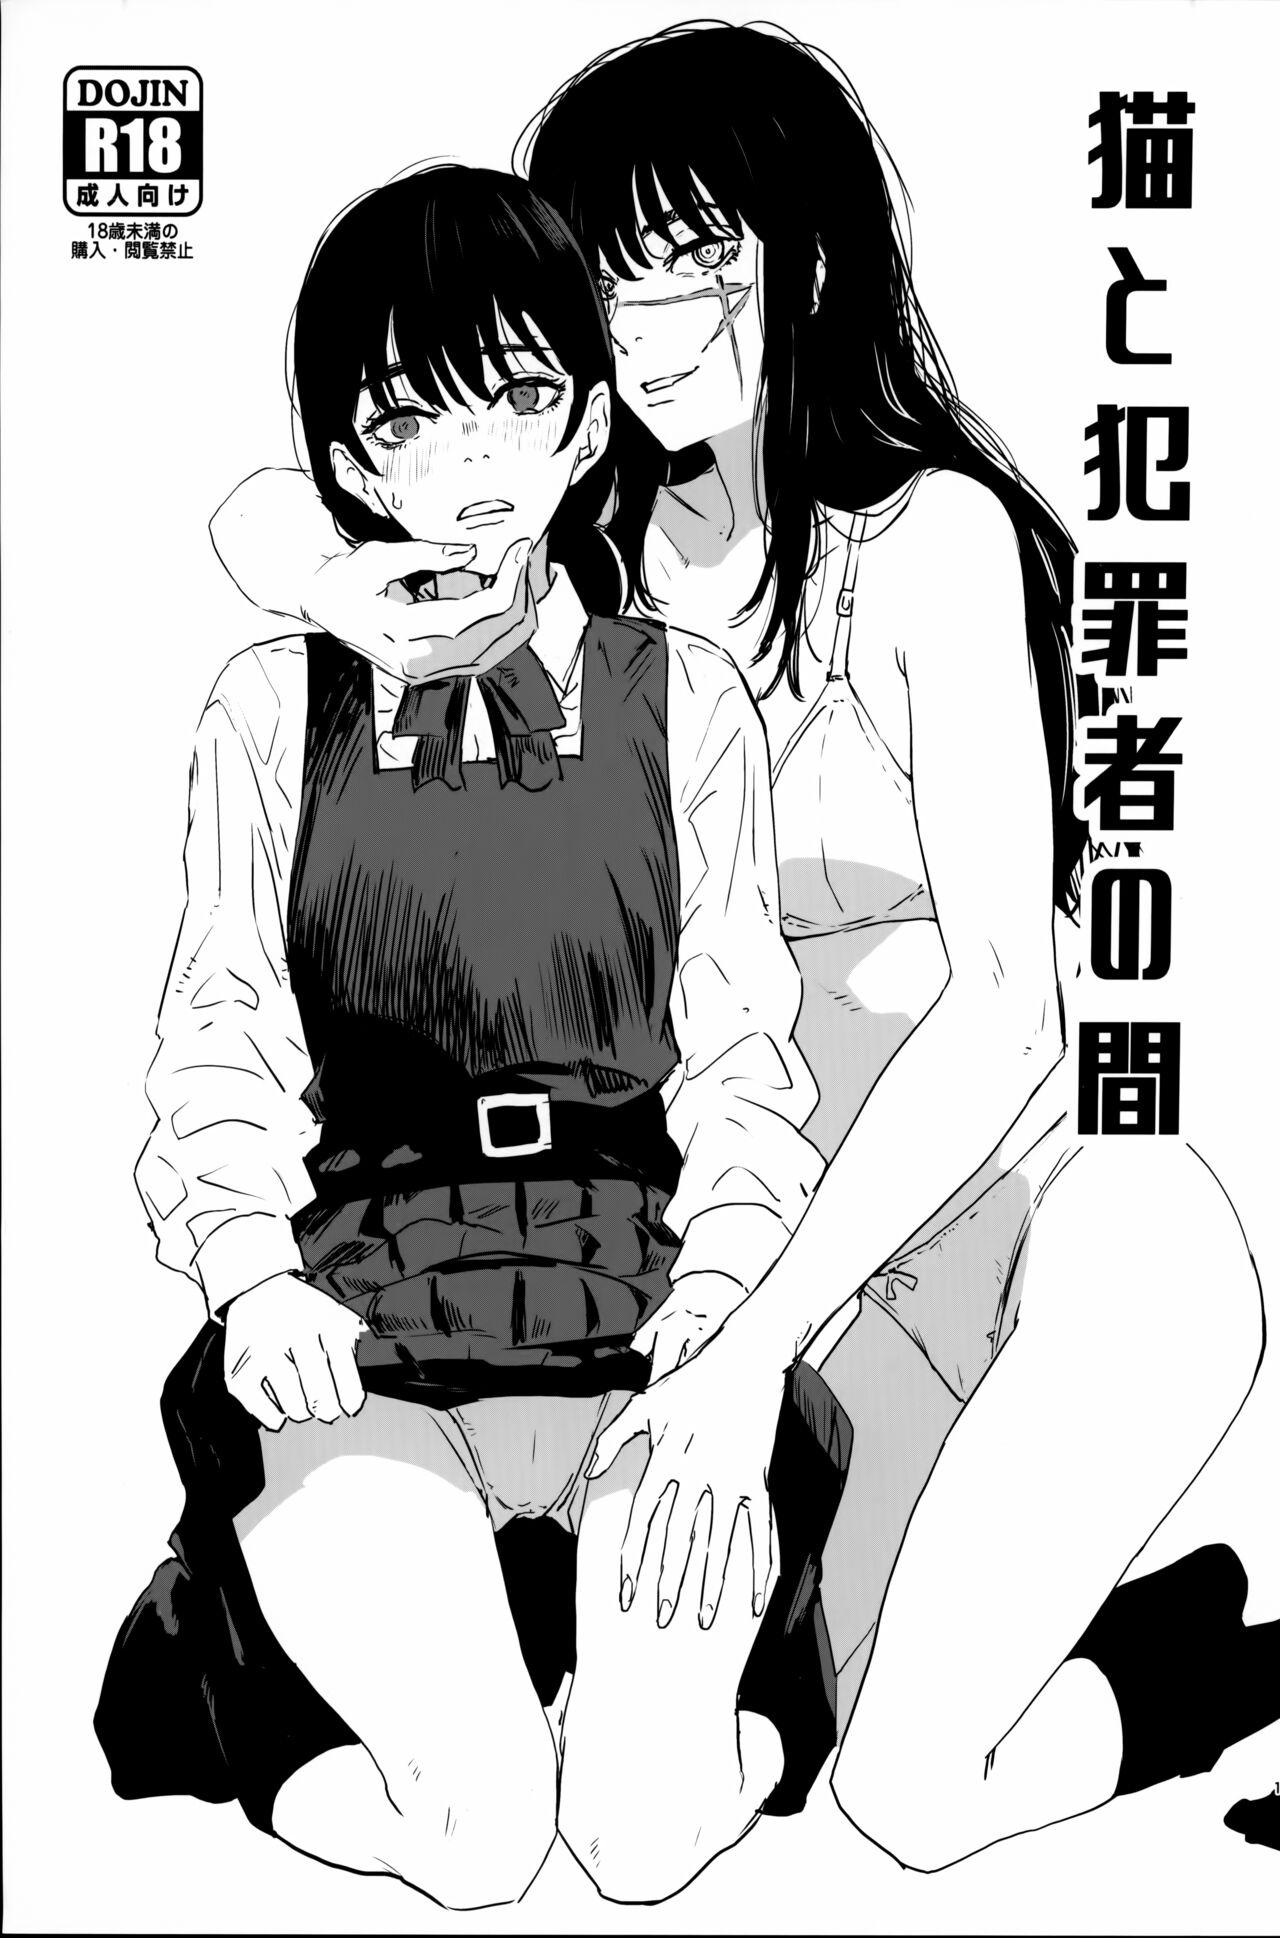 Culazo 猫と犯罪者の間 - Chainsaw man Wives - Page 1